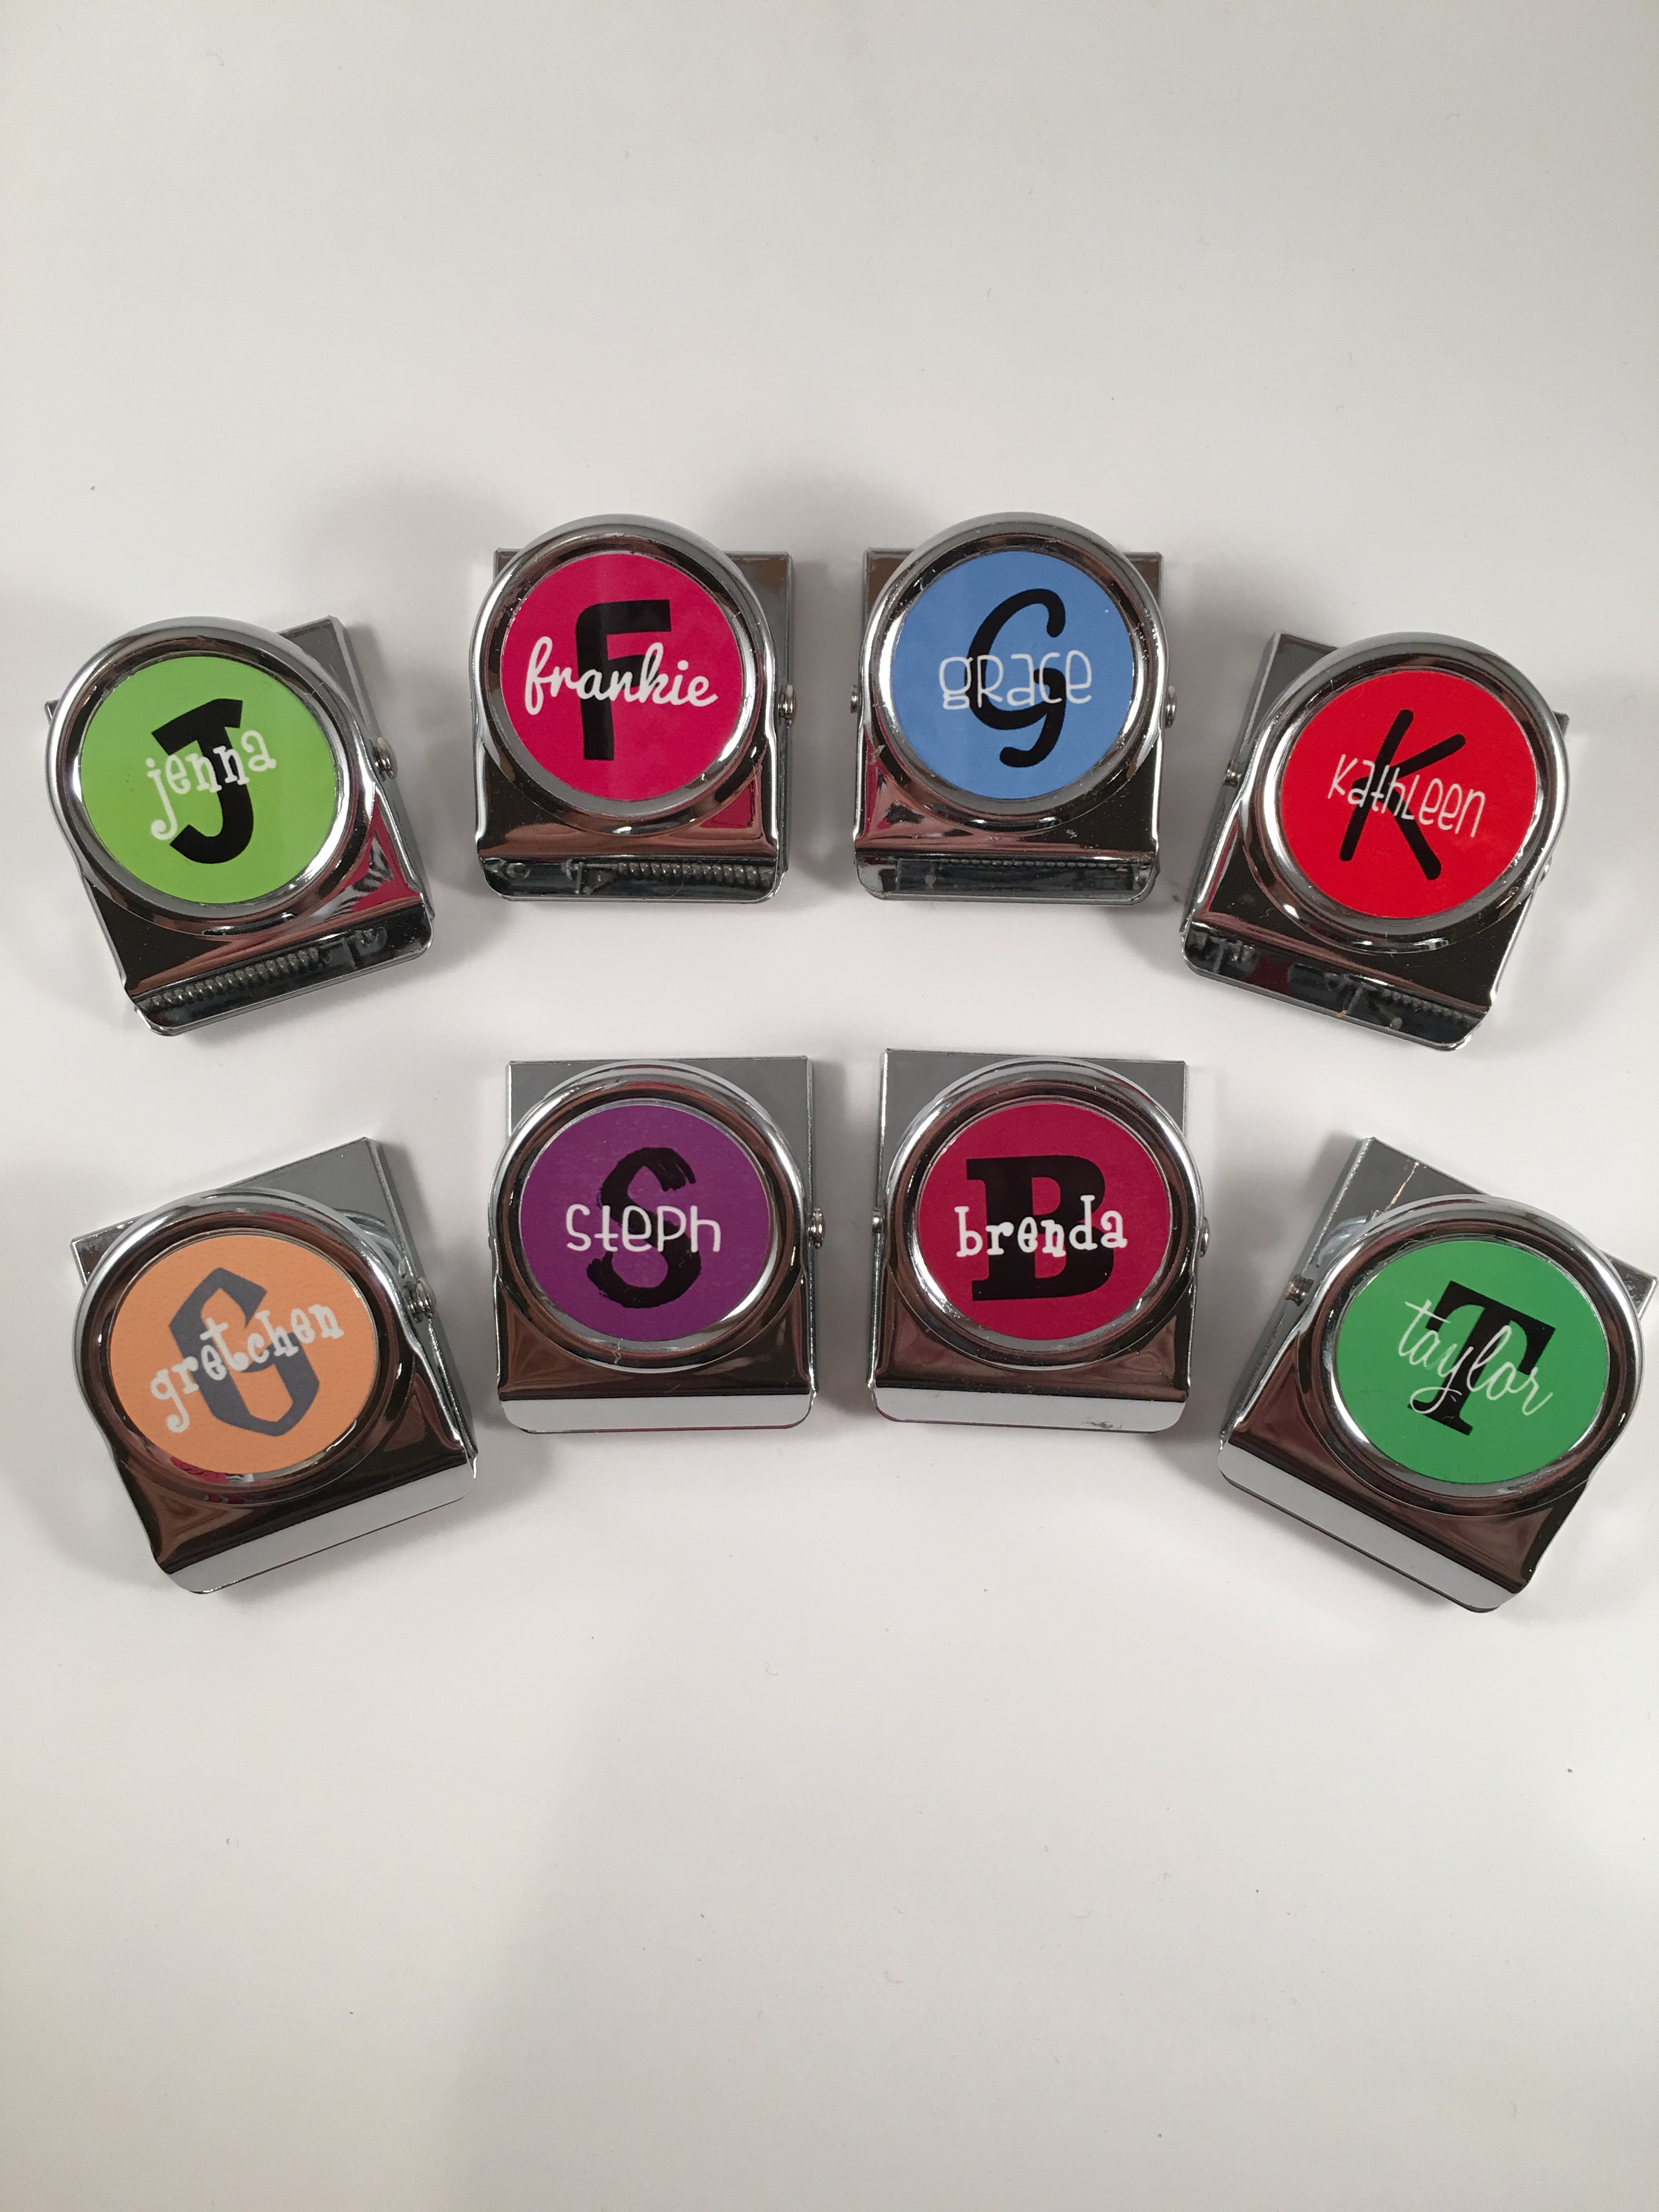 Memo Clips made with sublimation printing